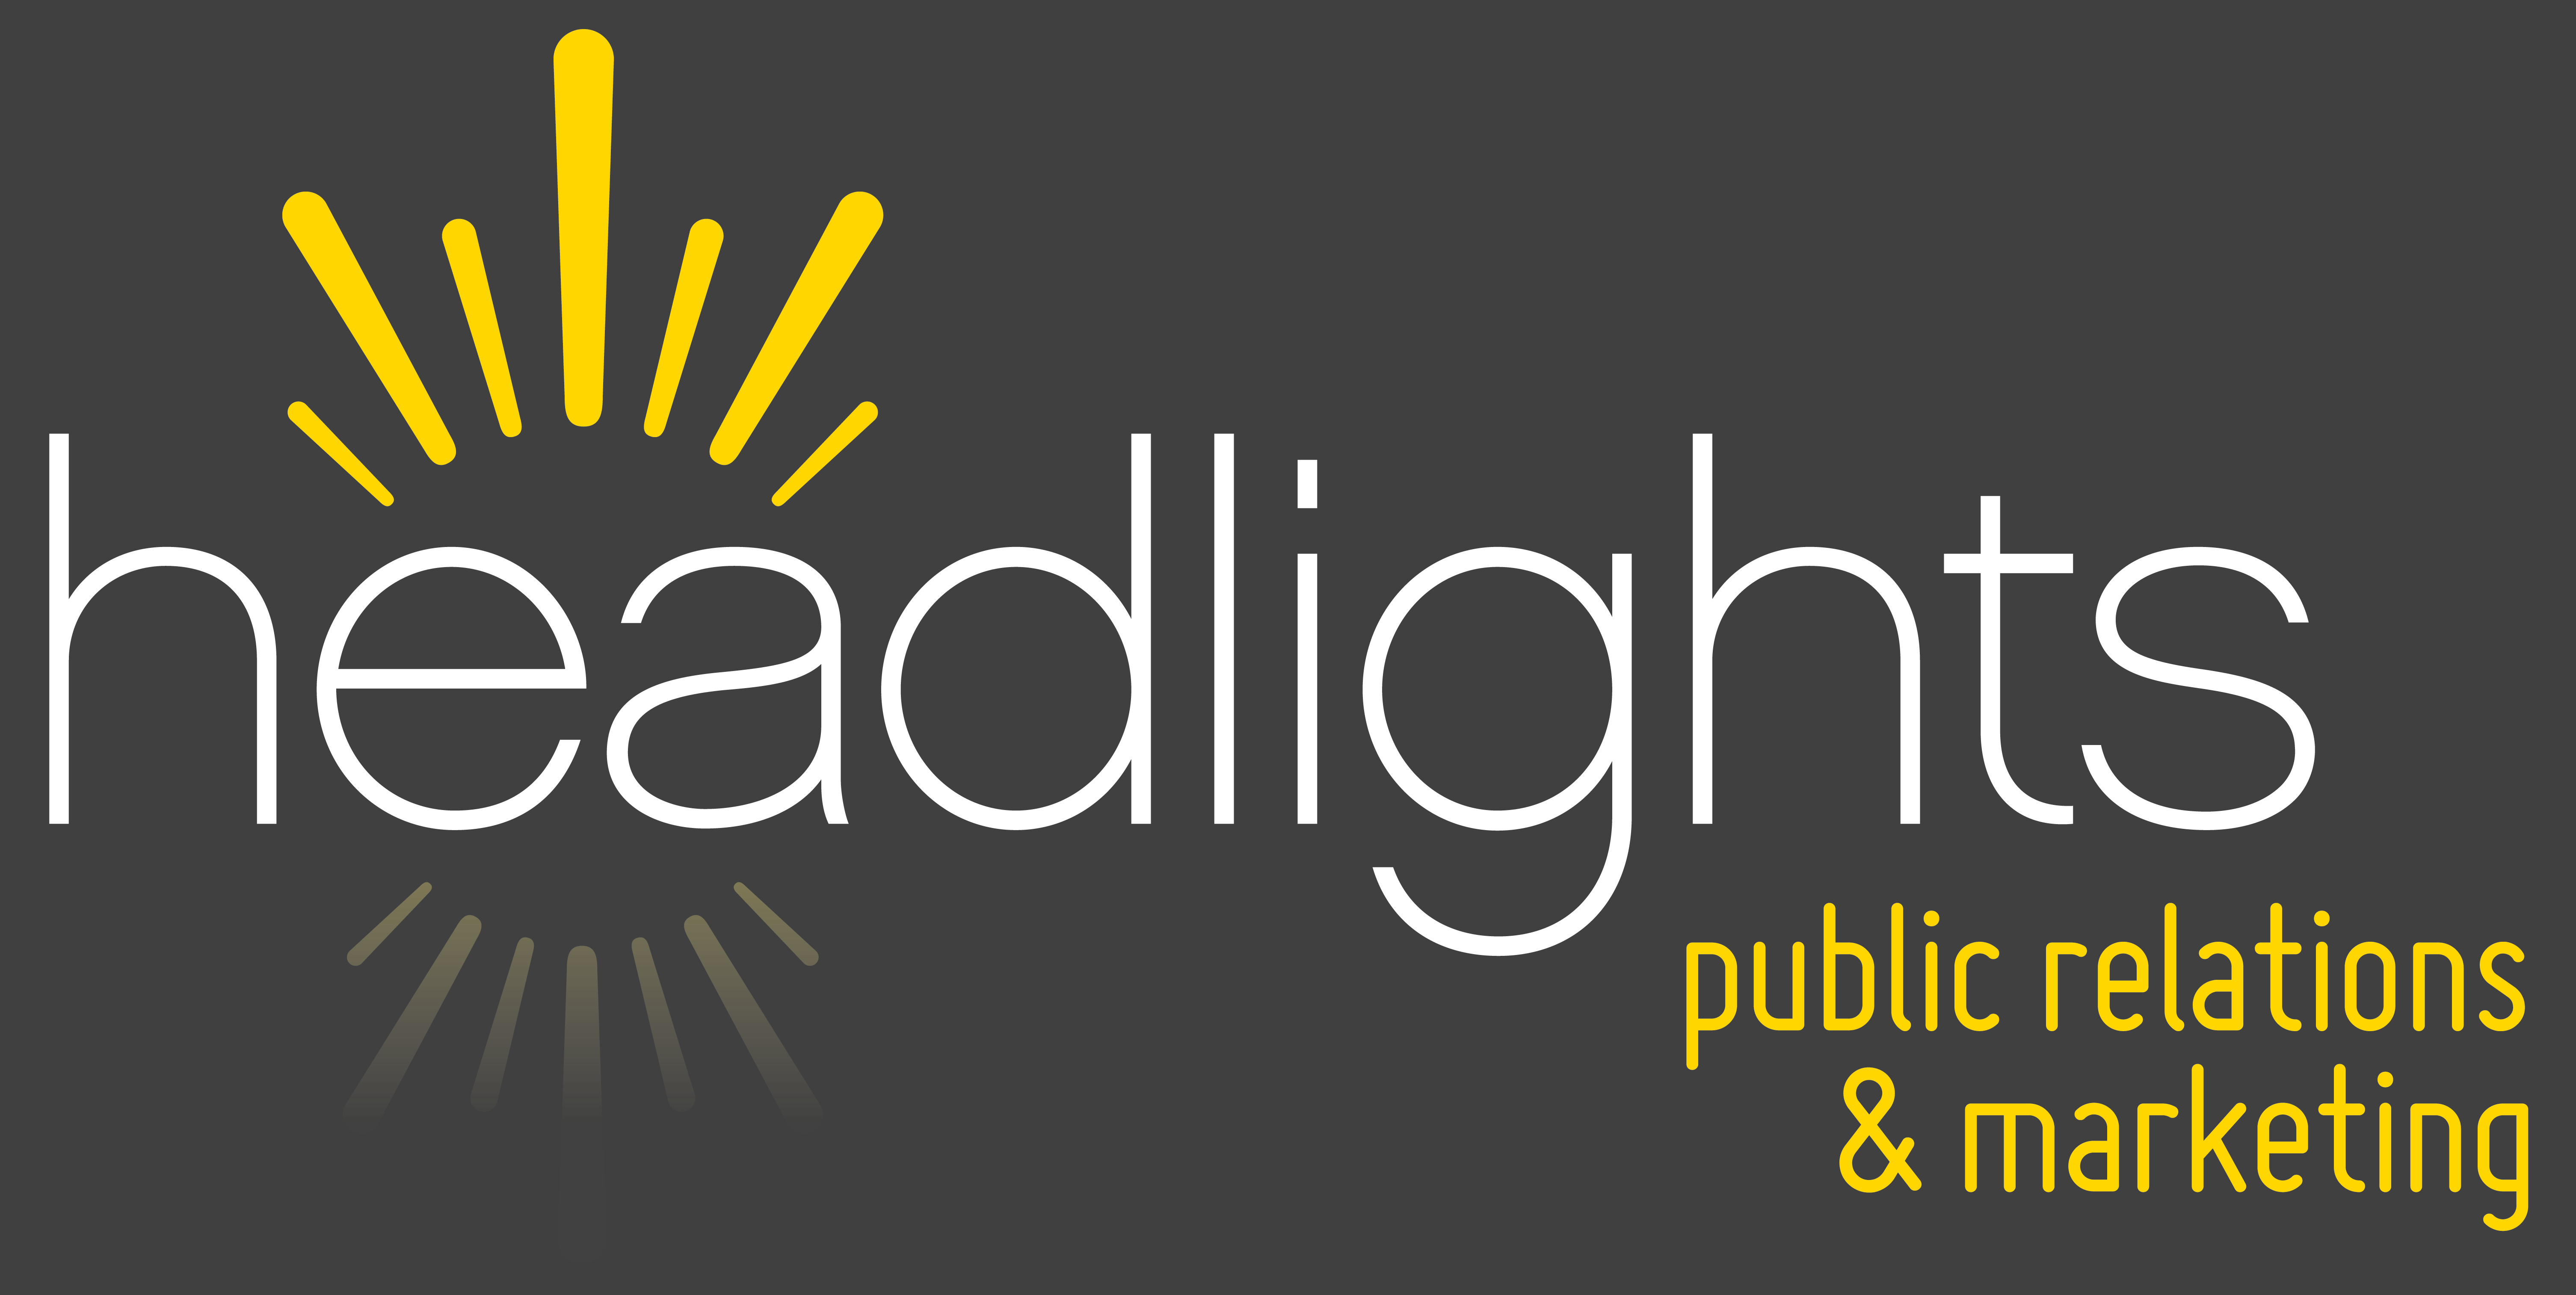 Headlights PR & Marketing looks to bolster Catholic school marketing by assisting schools with their communications to attract more students.